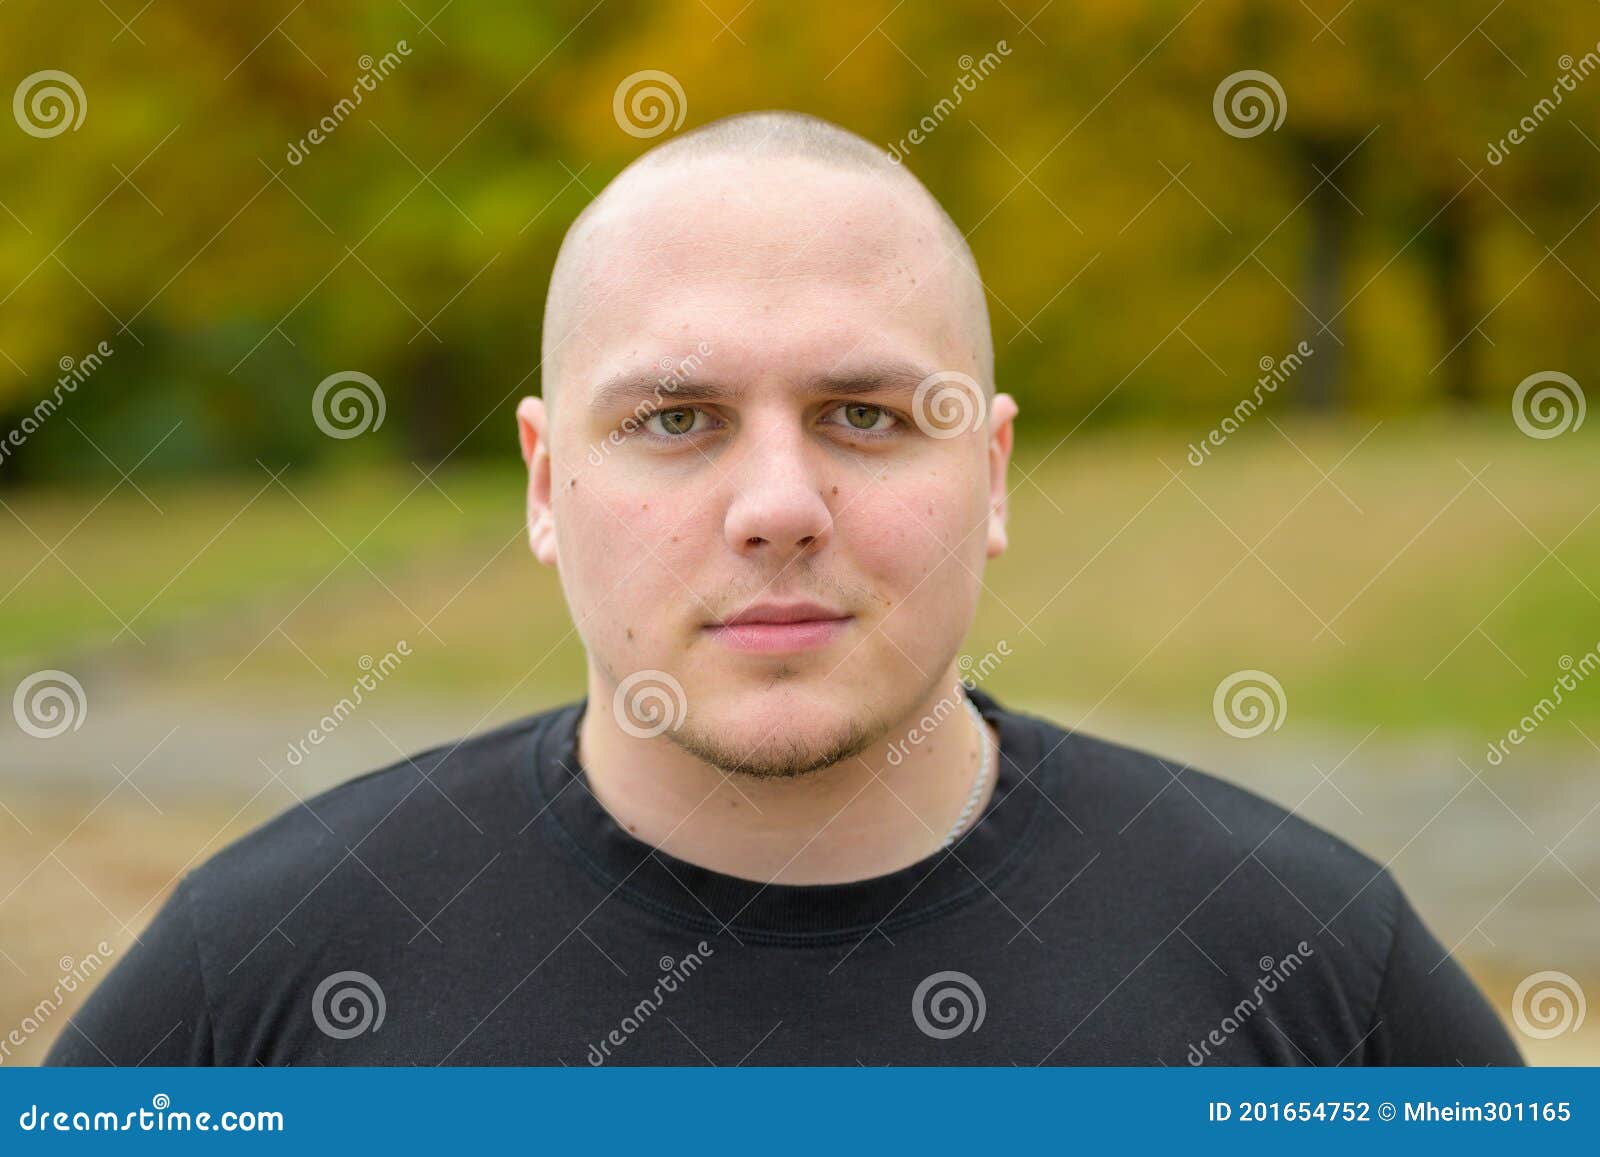 Thoughtful Intense Serious Young Man Outdoors Stock Photo - Image of ...